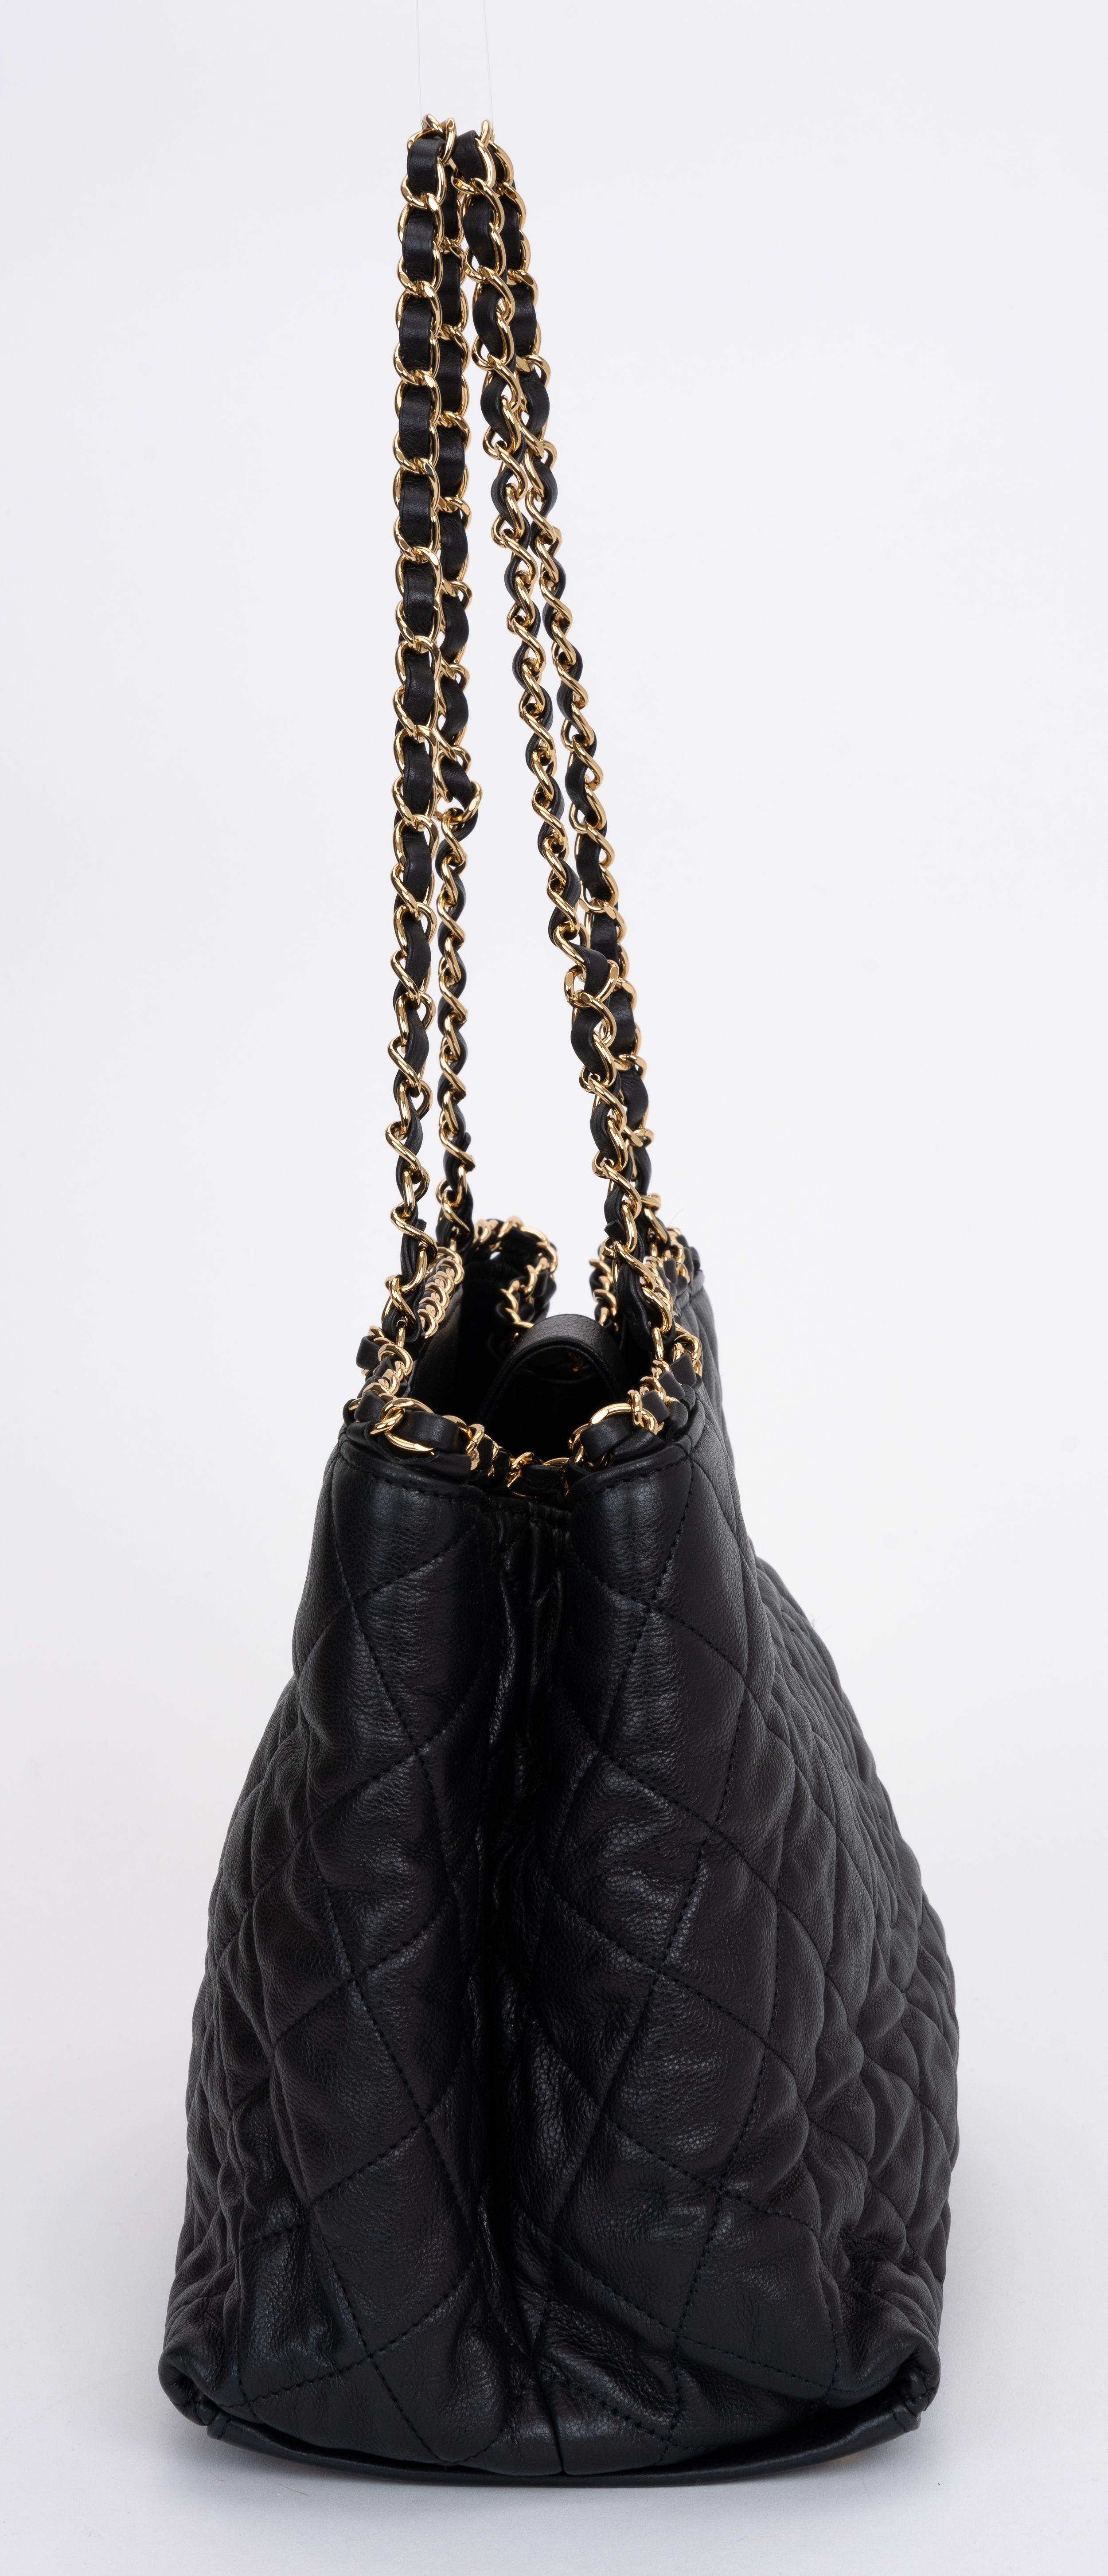 Chanel Black Quilted Gold Chain Me Tote In Excellent Condition For Sale In West Hollywood, CA